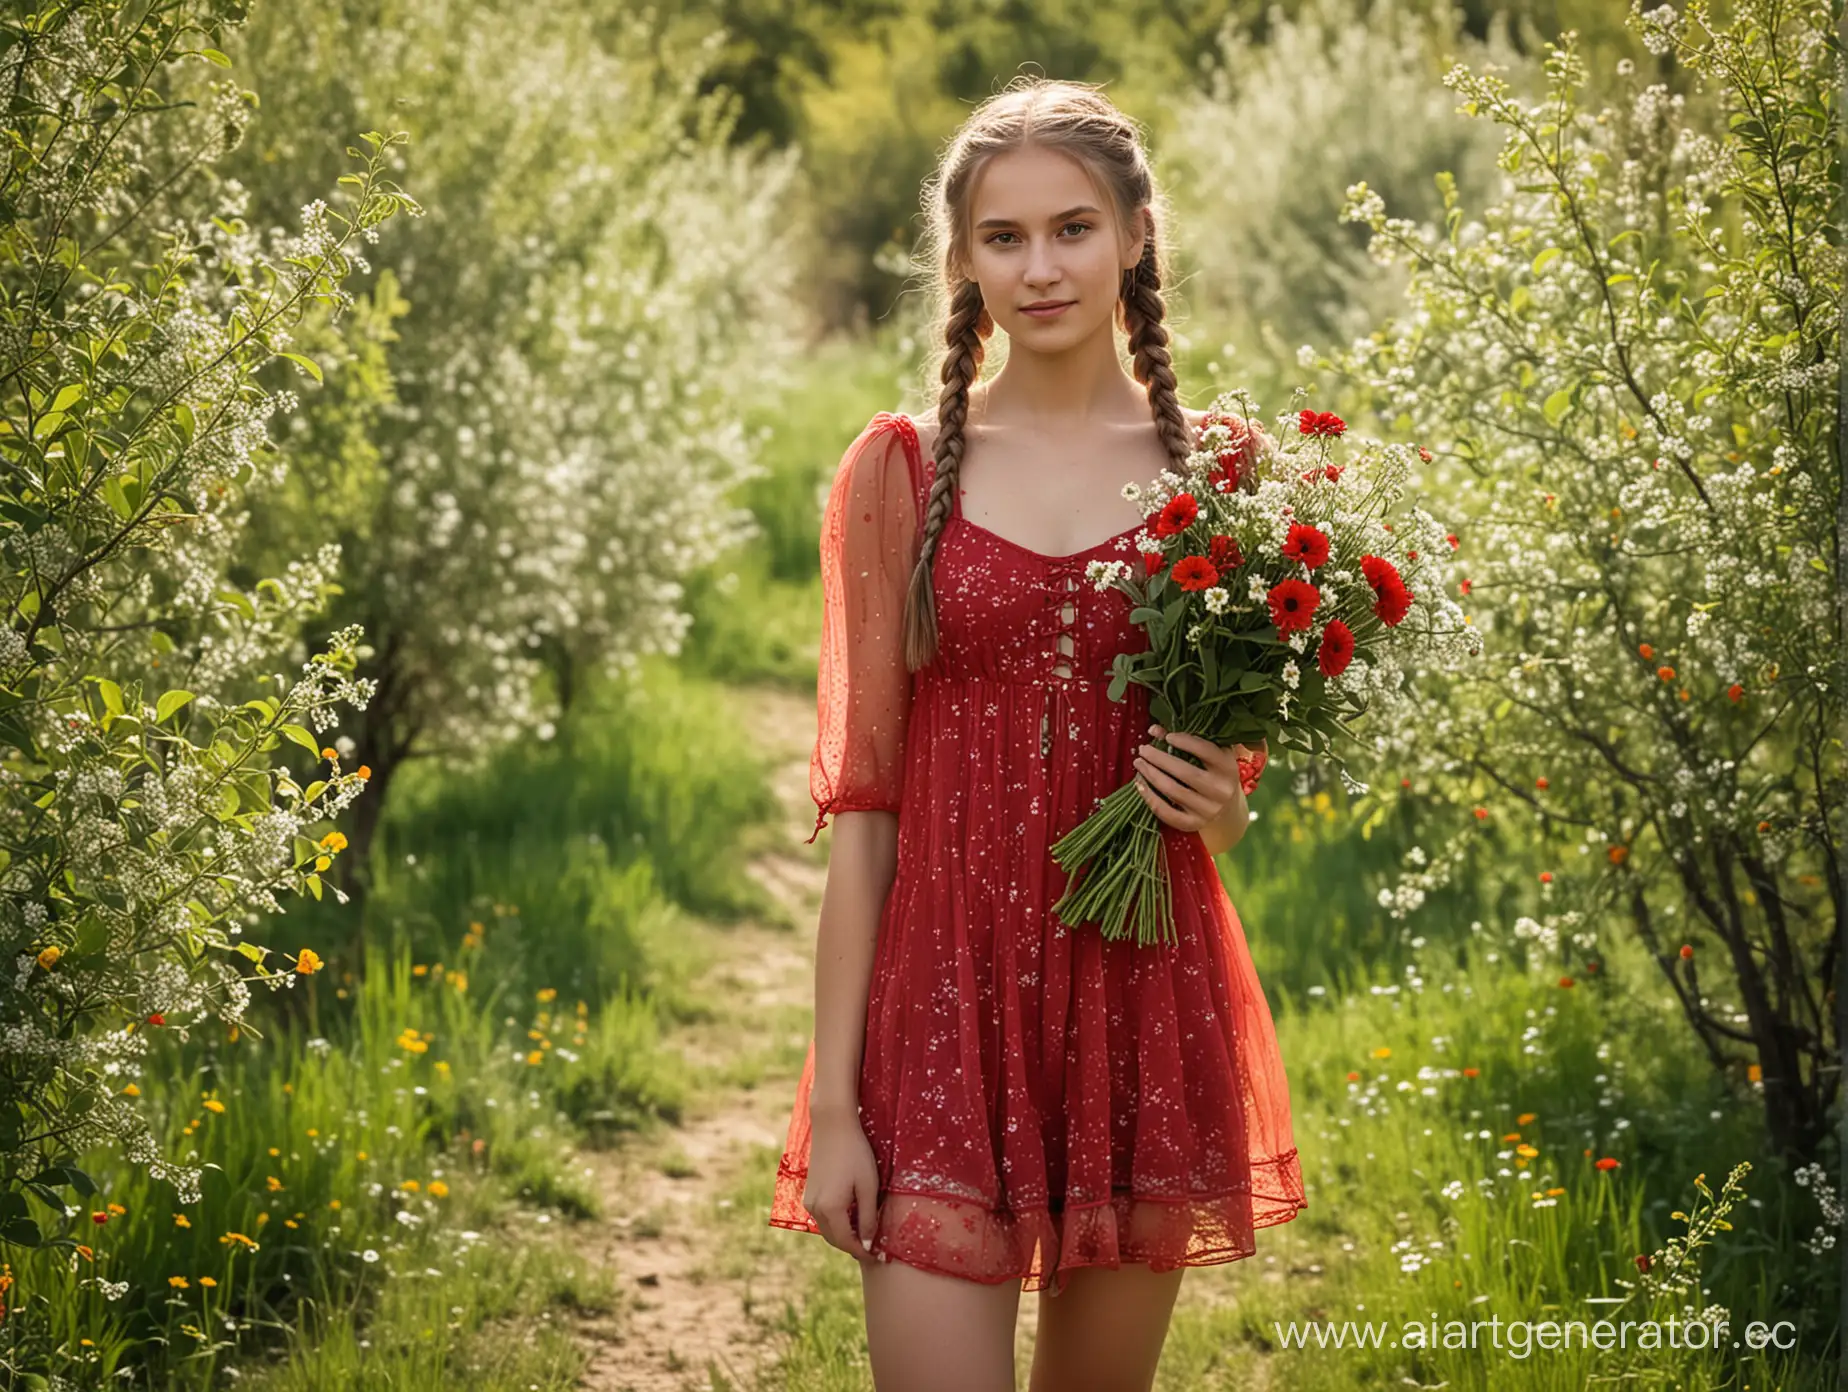 Russian-Young-Girl-in-Red-Dress-Holding-Wildflower-Bouquet-in-Orchard